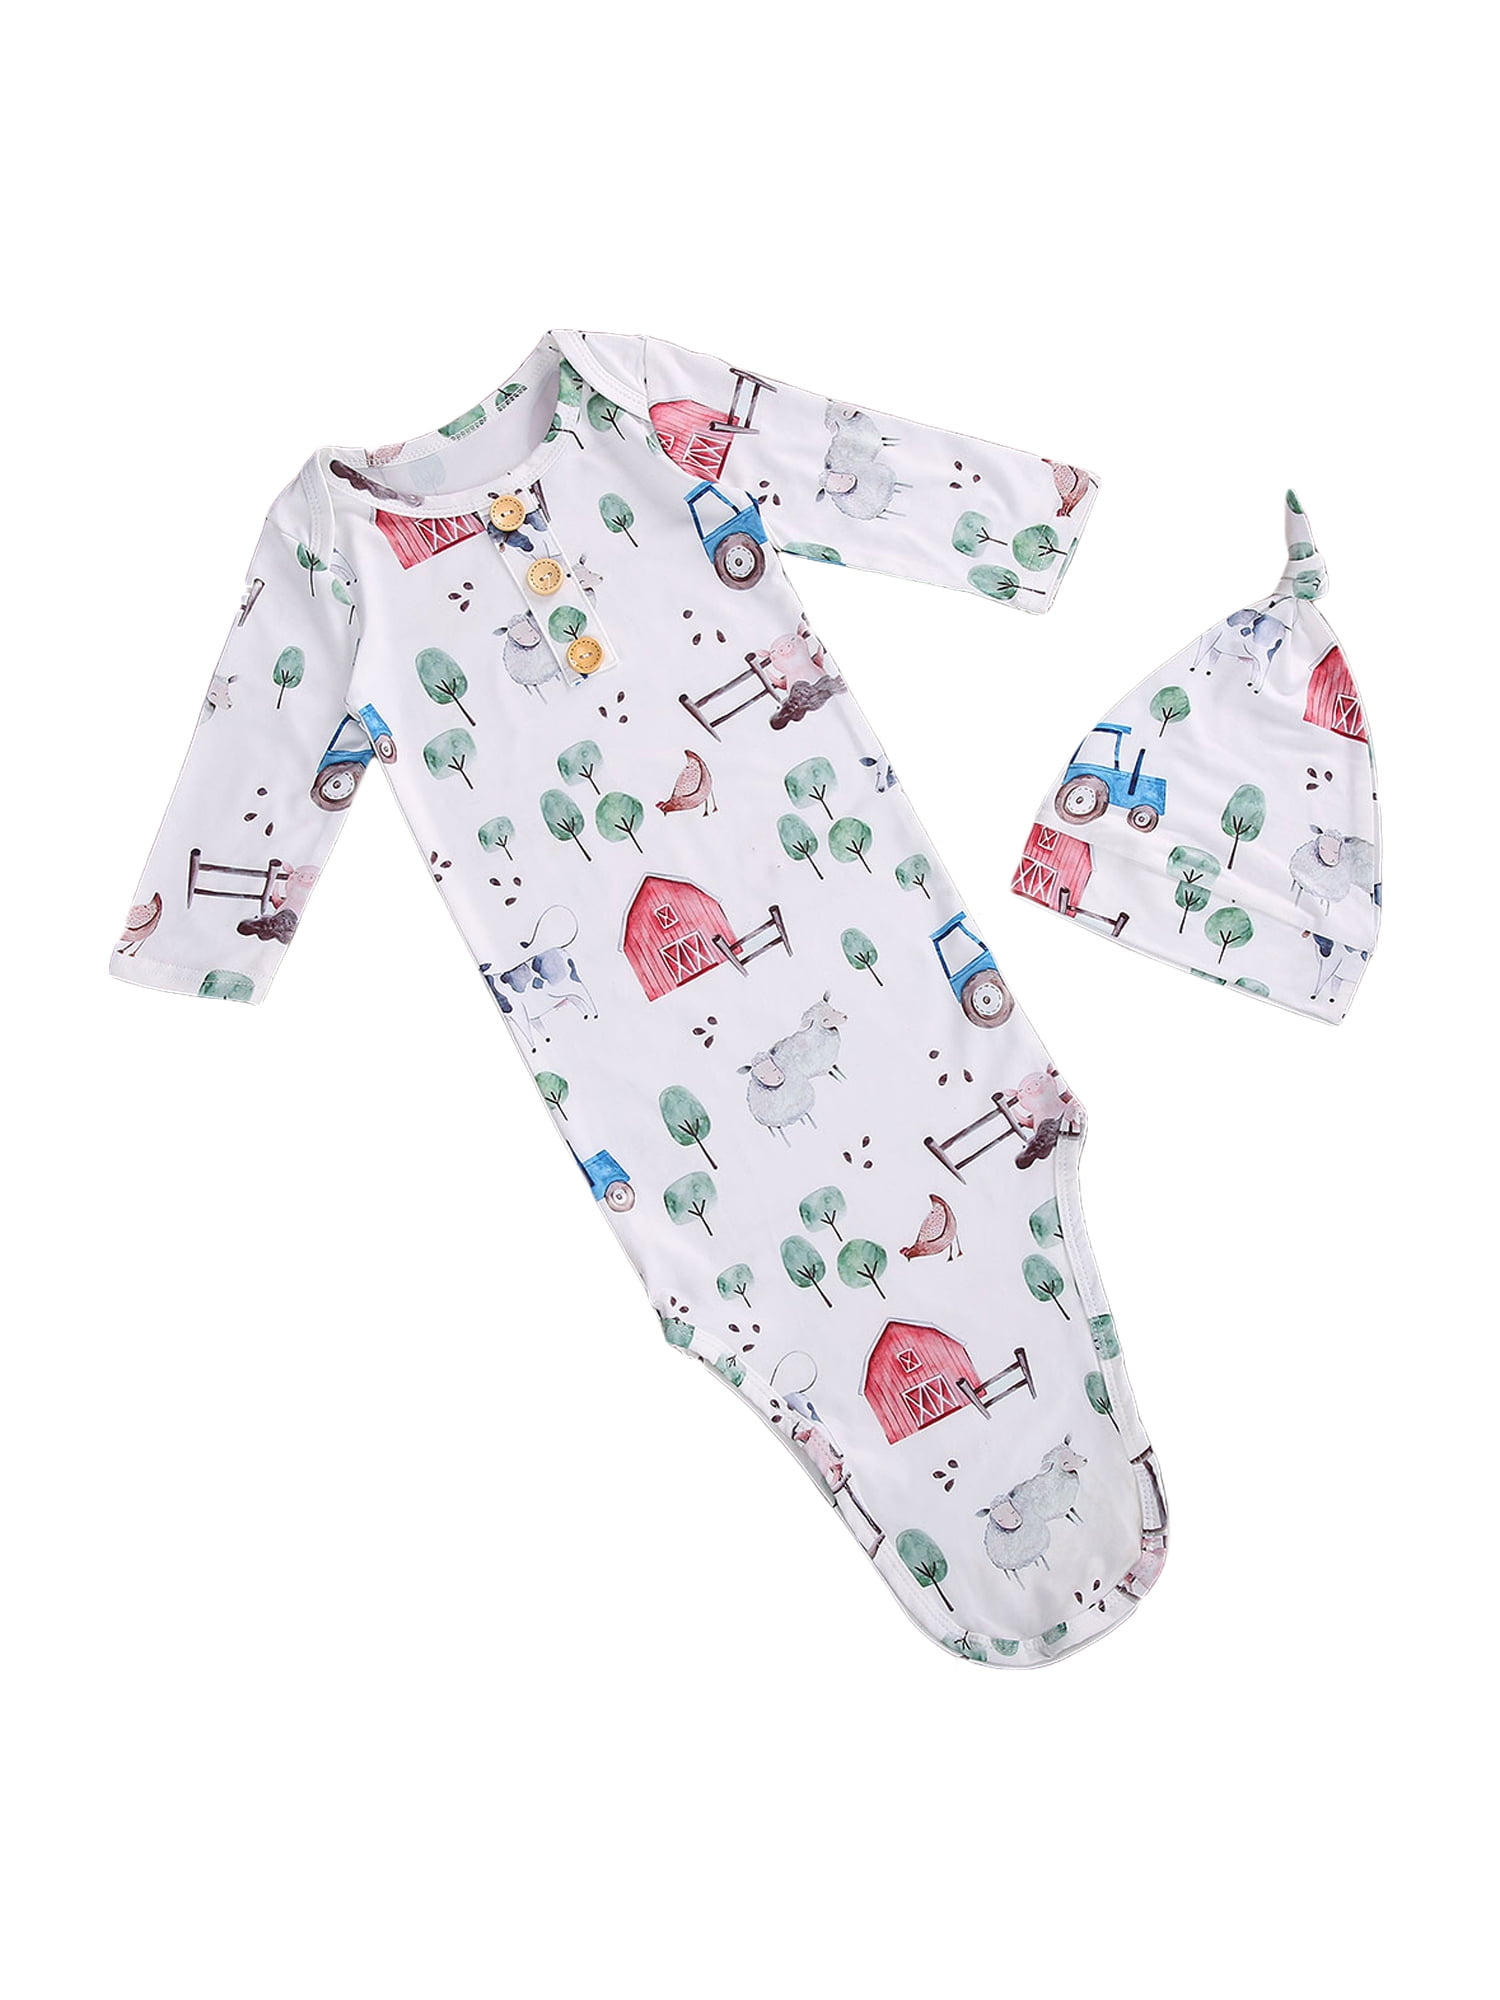 Newborn Infant Baby Girl Boy Gowns Sleeping Bag Pajamas Coming Home Outfits Swaddle Blanket Cotton Nightgown Sleepwear